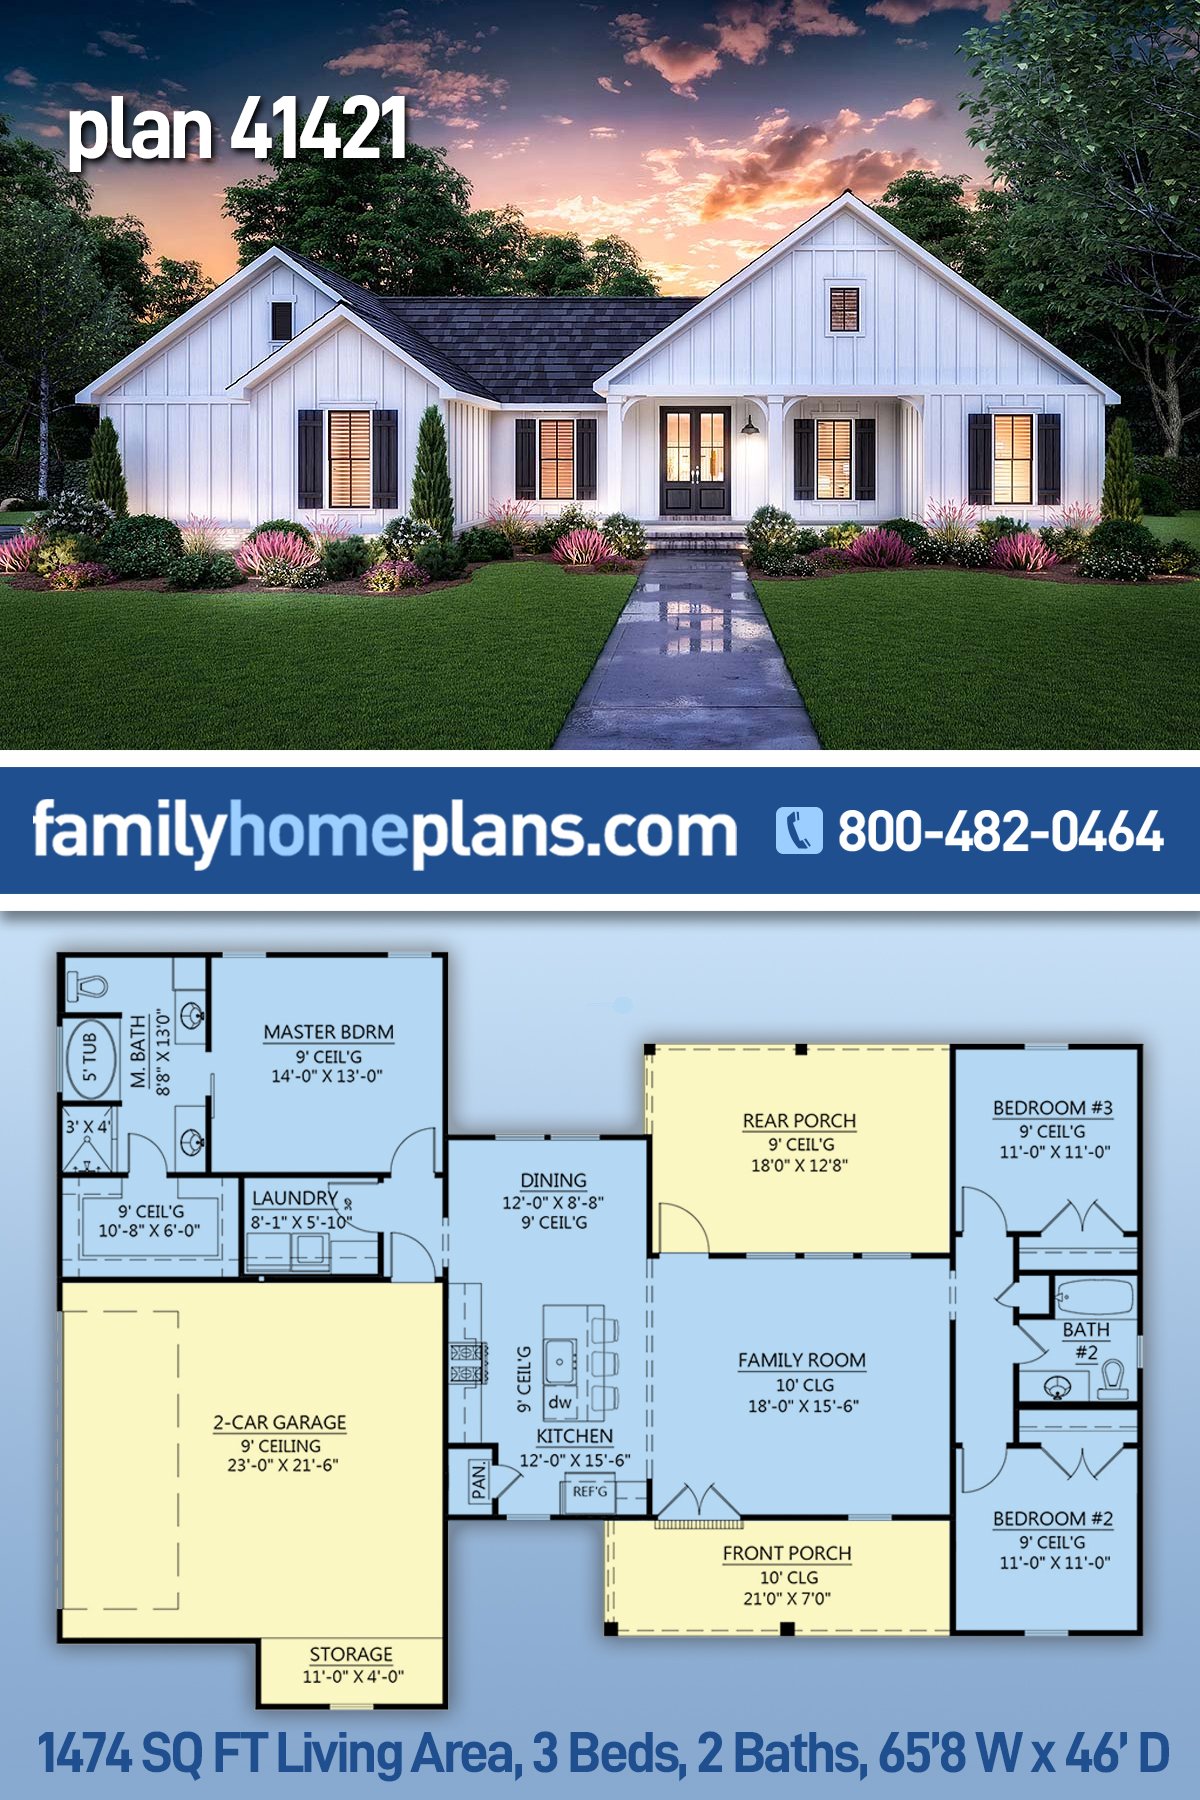 Plan 41421 | Three Bedroom Country Farmhouse with Board and Batte